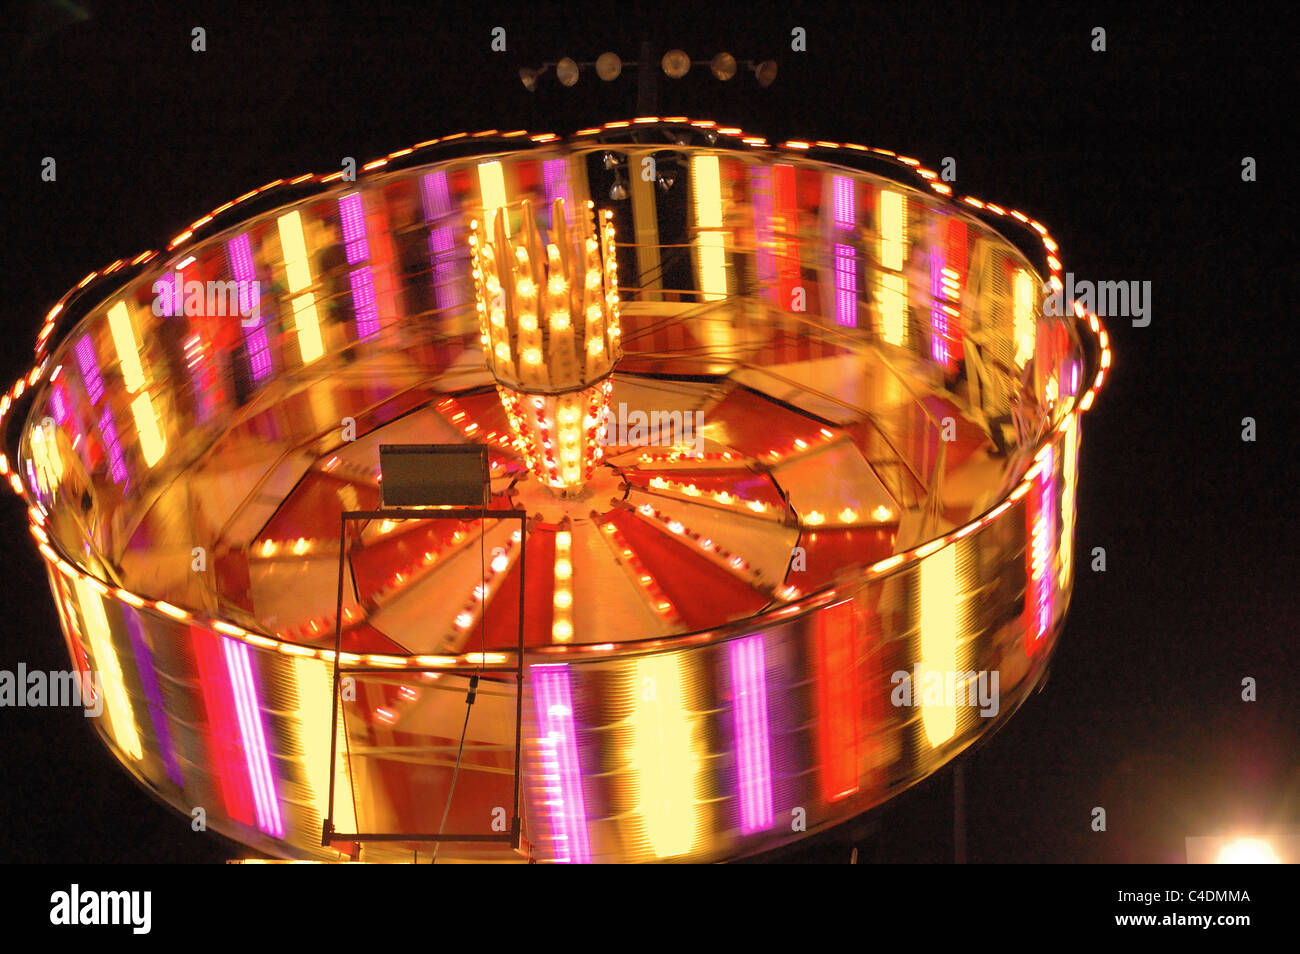 Gravitron Type Carnival Ride Demonstrates Centrifugal Force Stock Photo